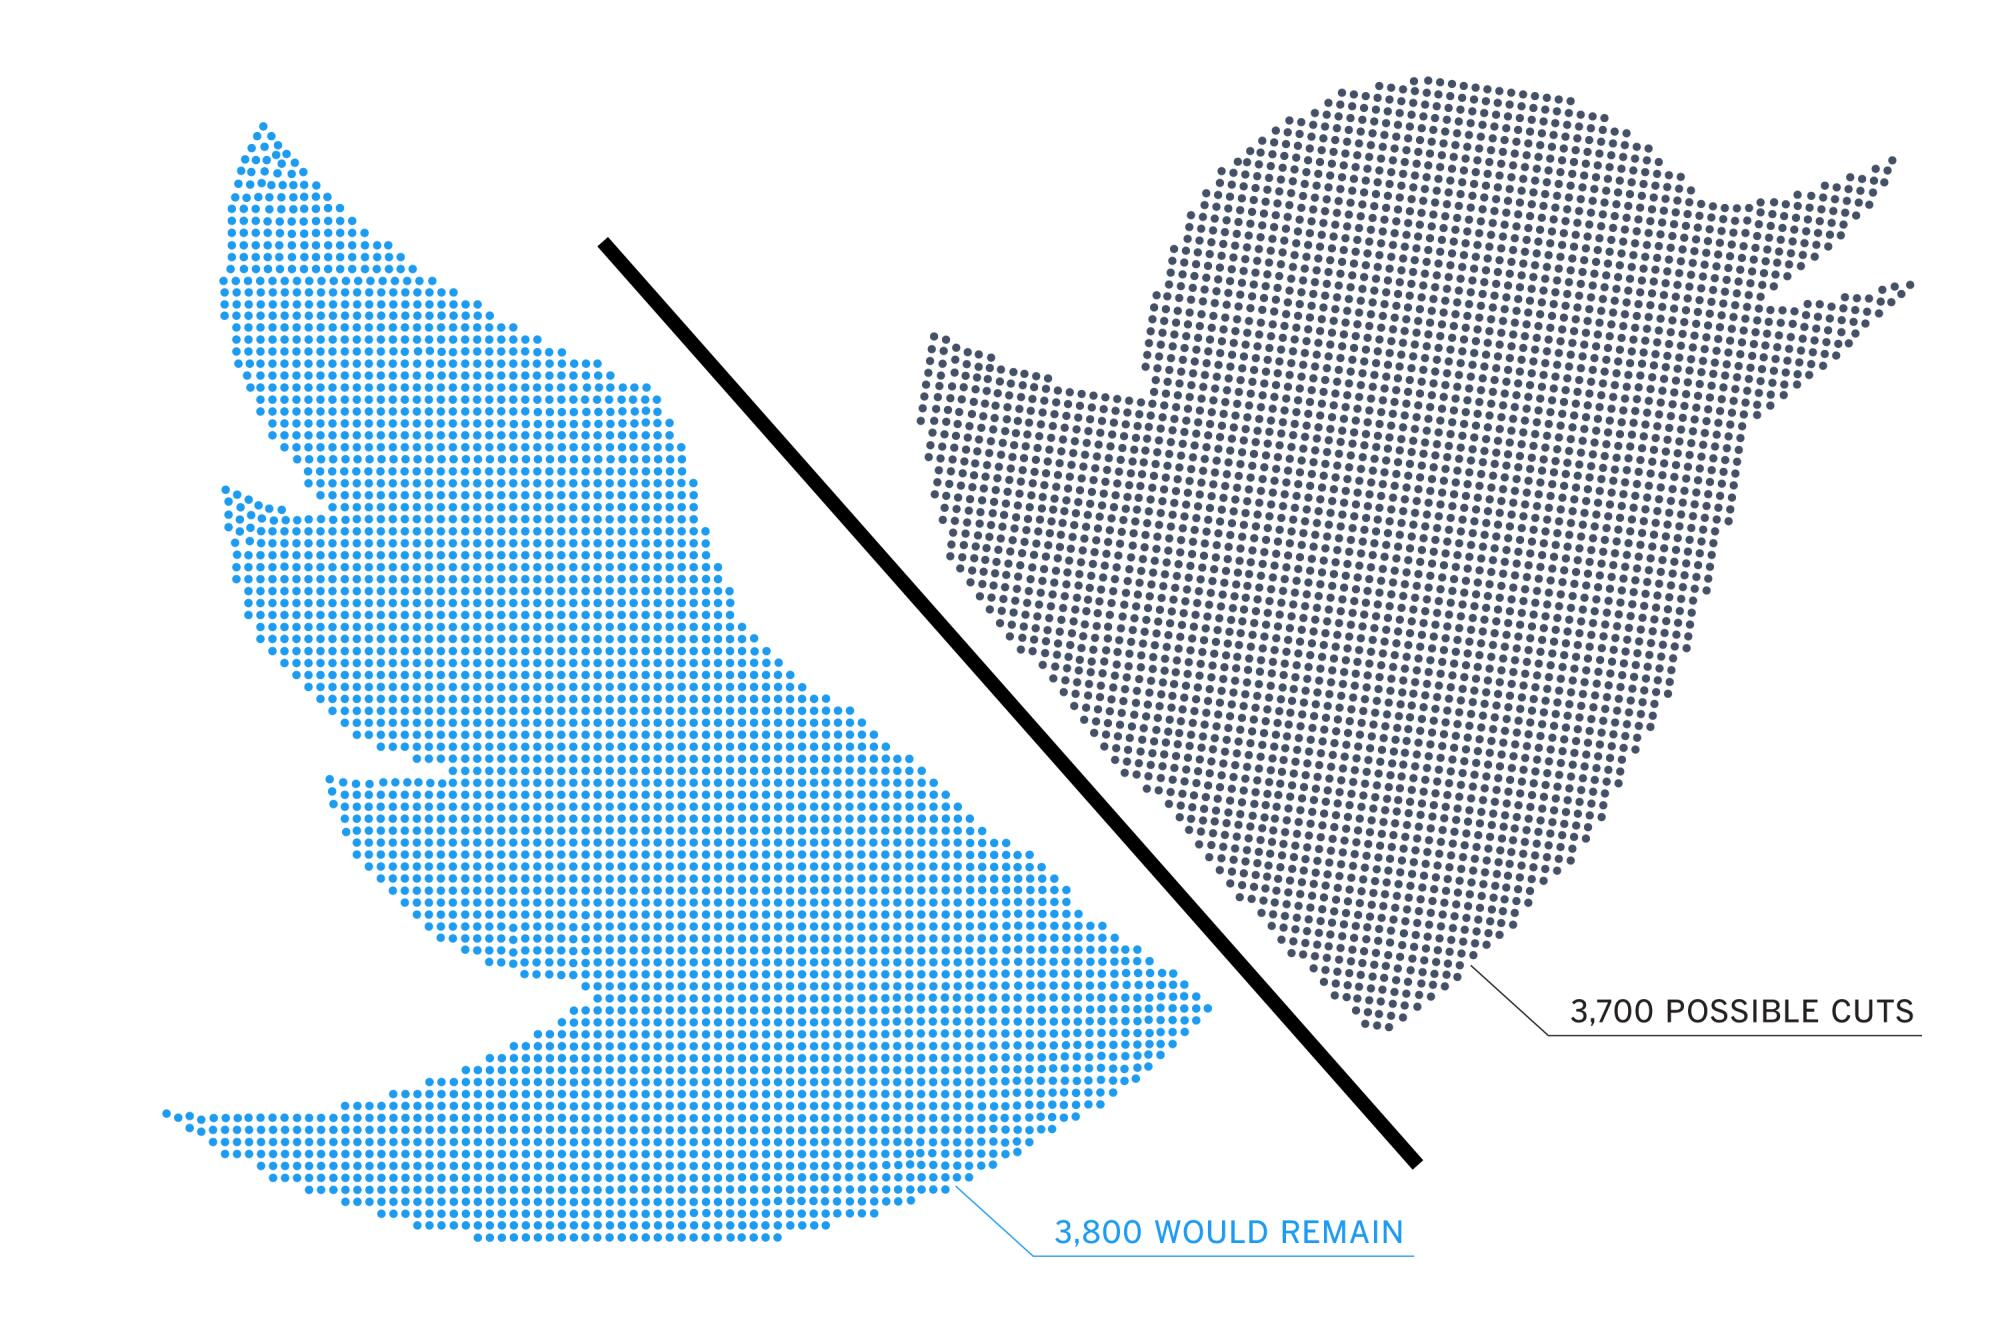 Graphic illustration of the Twitter logo built out of dots representing employees split into 2 groups of 3,800 and 3,700.